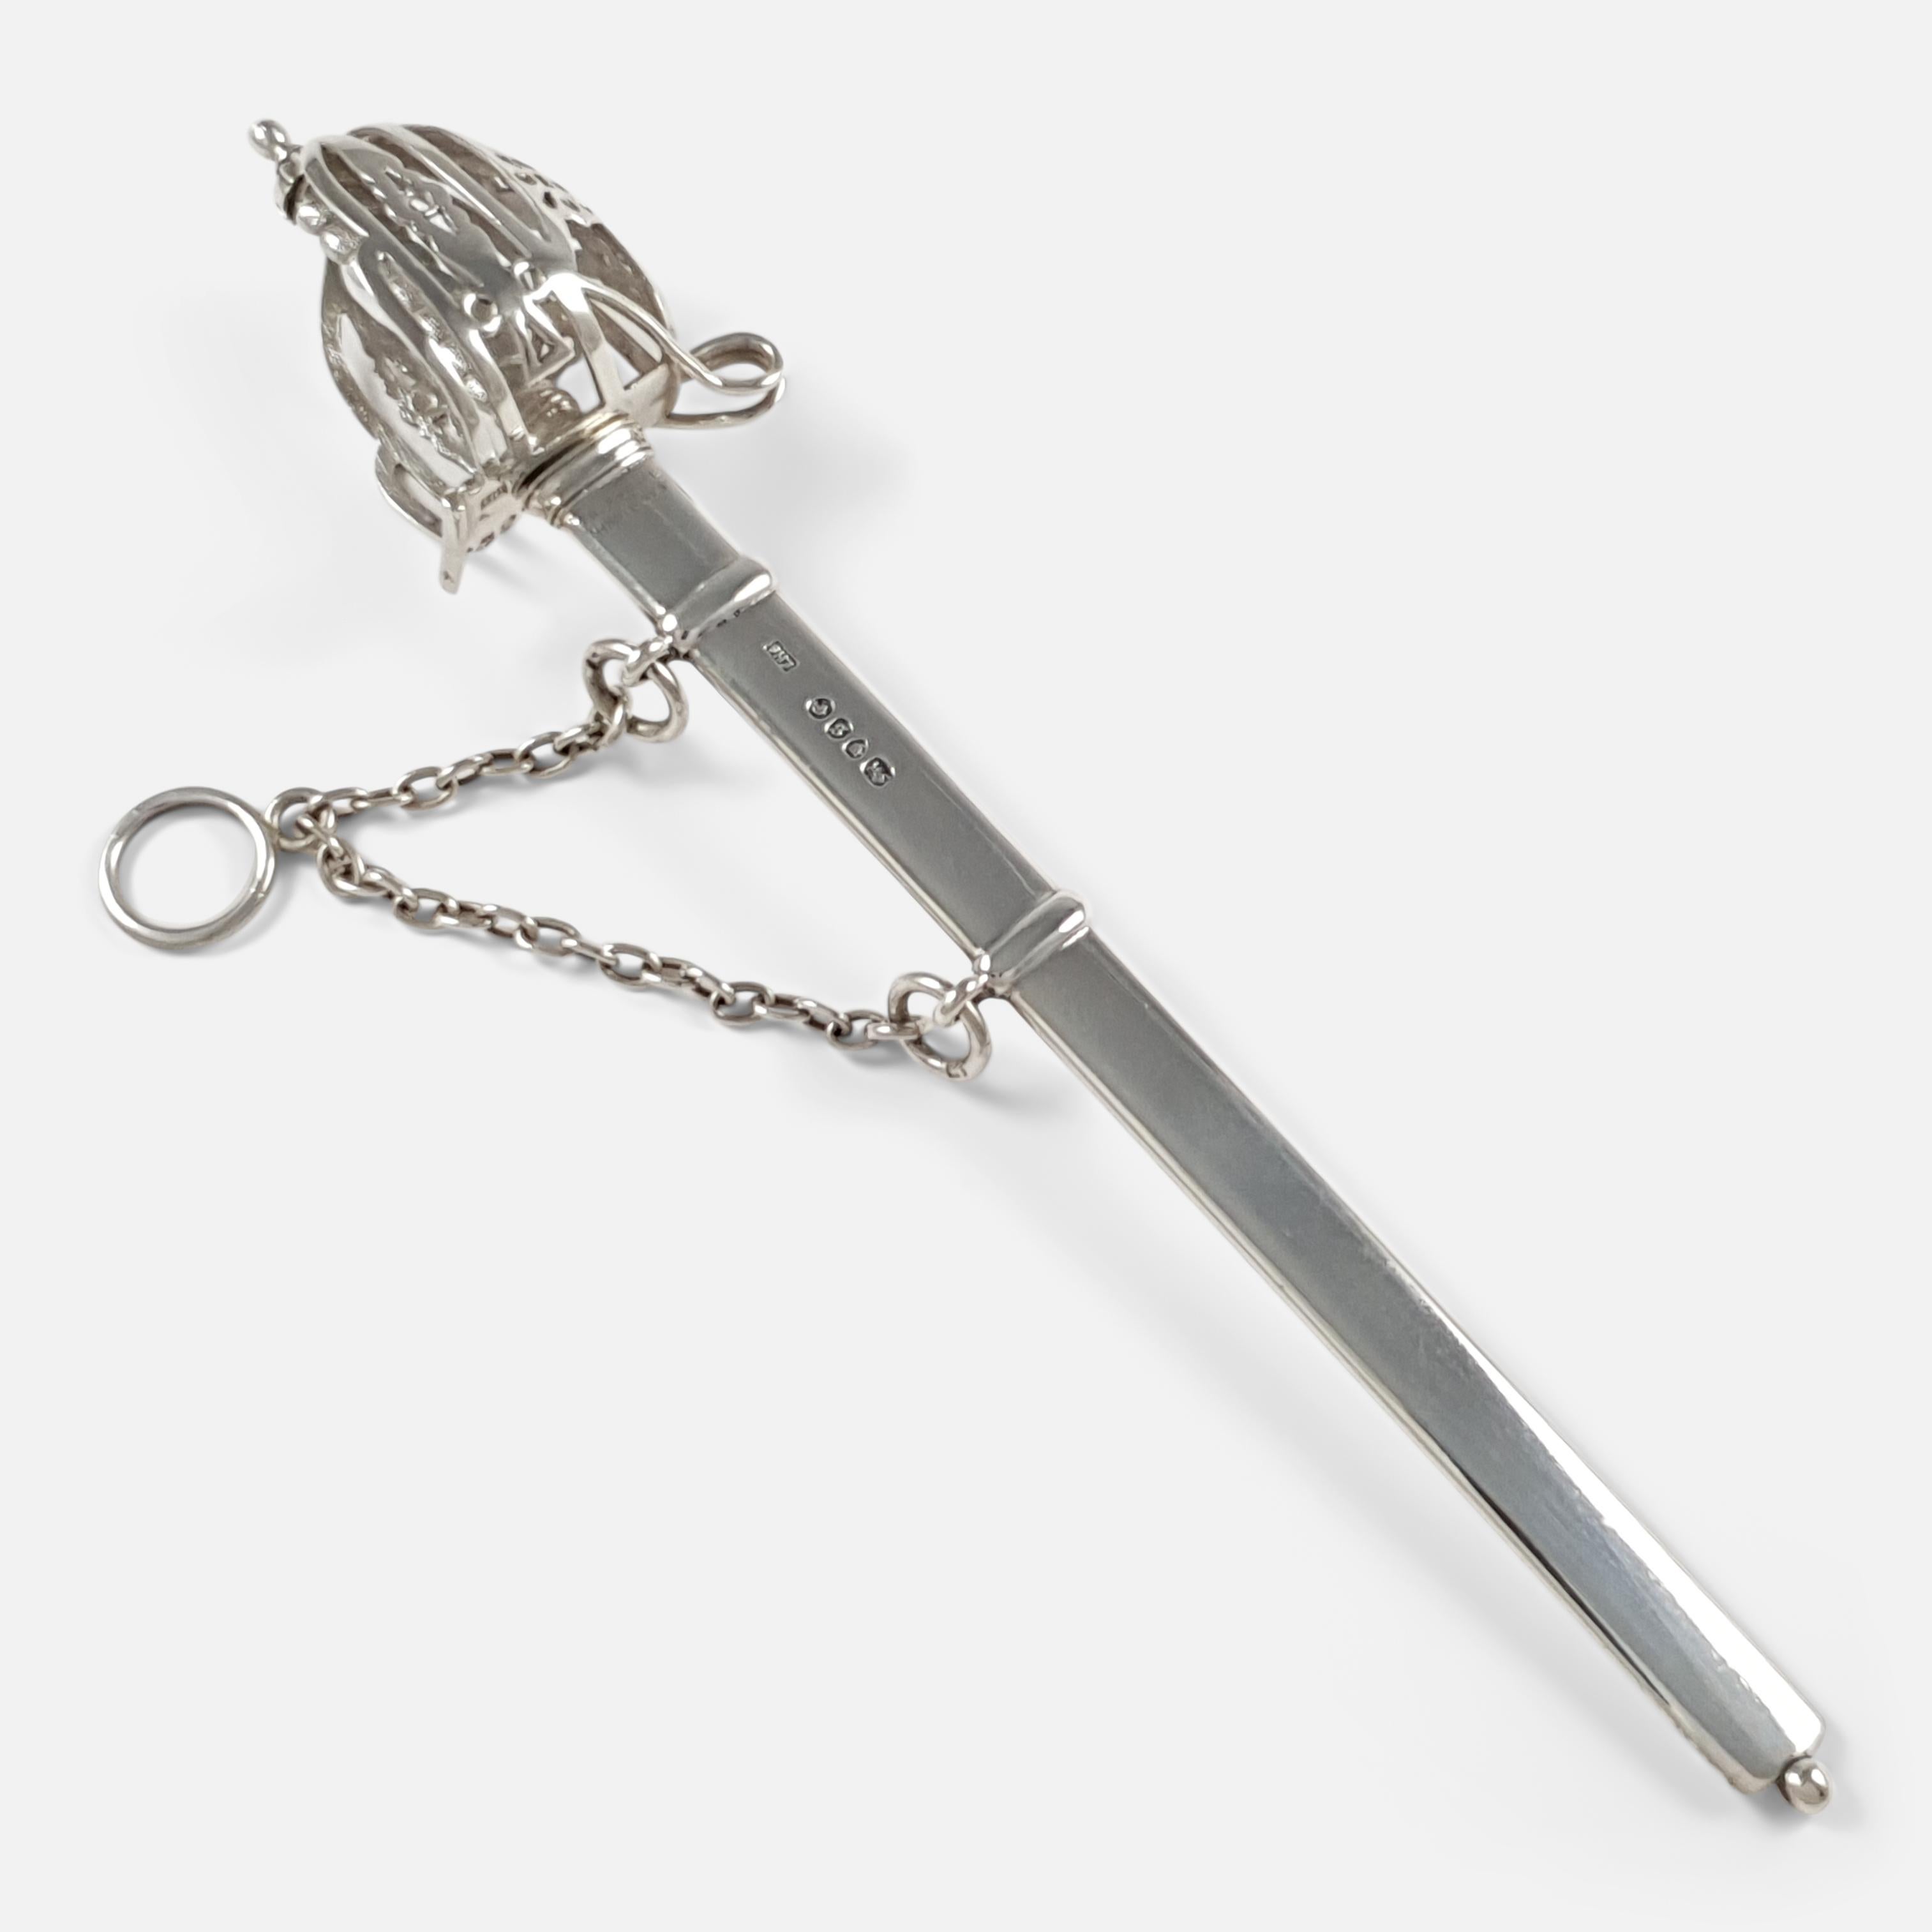 A Victorian Sterling Silver replica Scottish Basket-hilted broad sword letter opener with scabbard and short chain. The basket hilted handle is beautifully crafted with a pierced decoration, leading to a double edged blade, held within a scabbard on